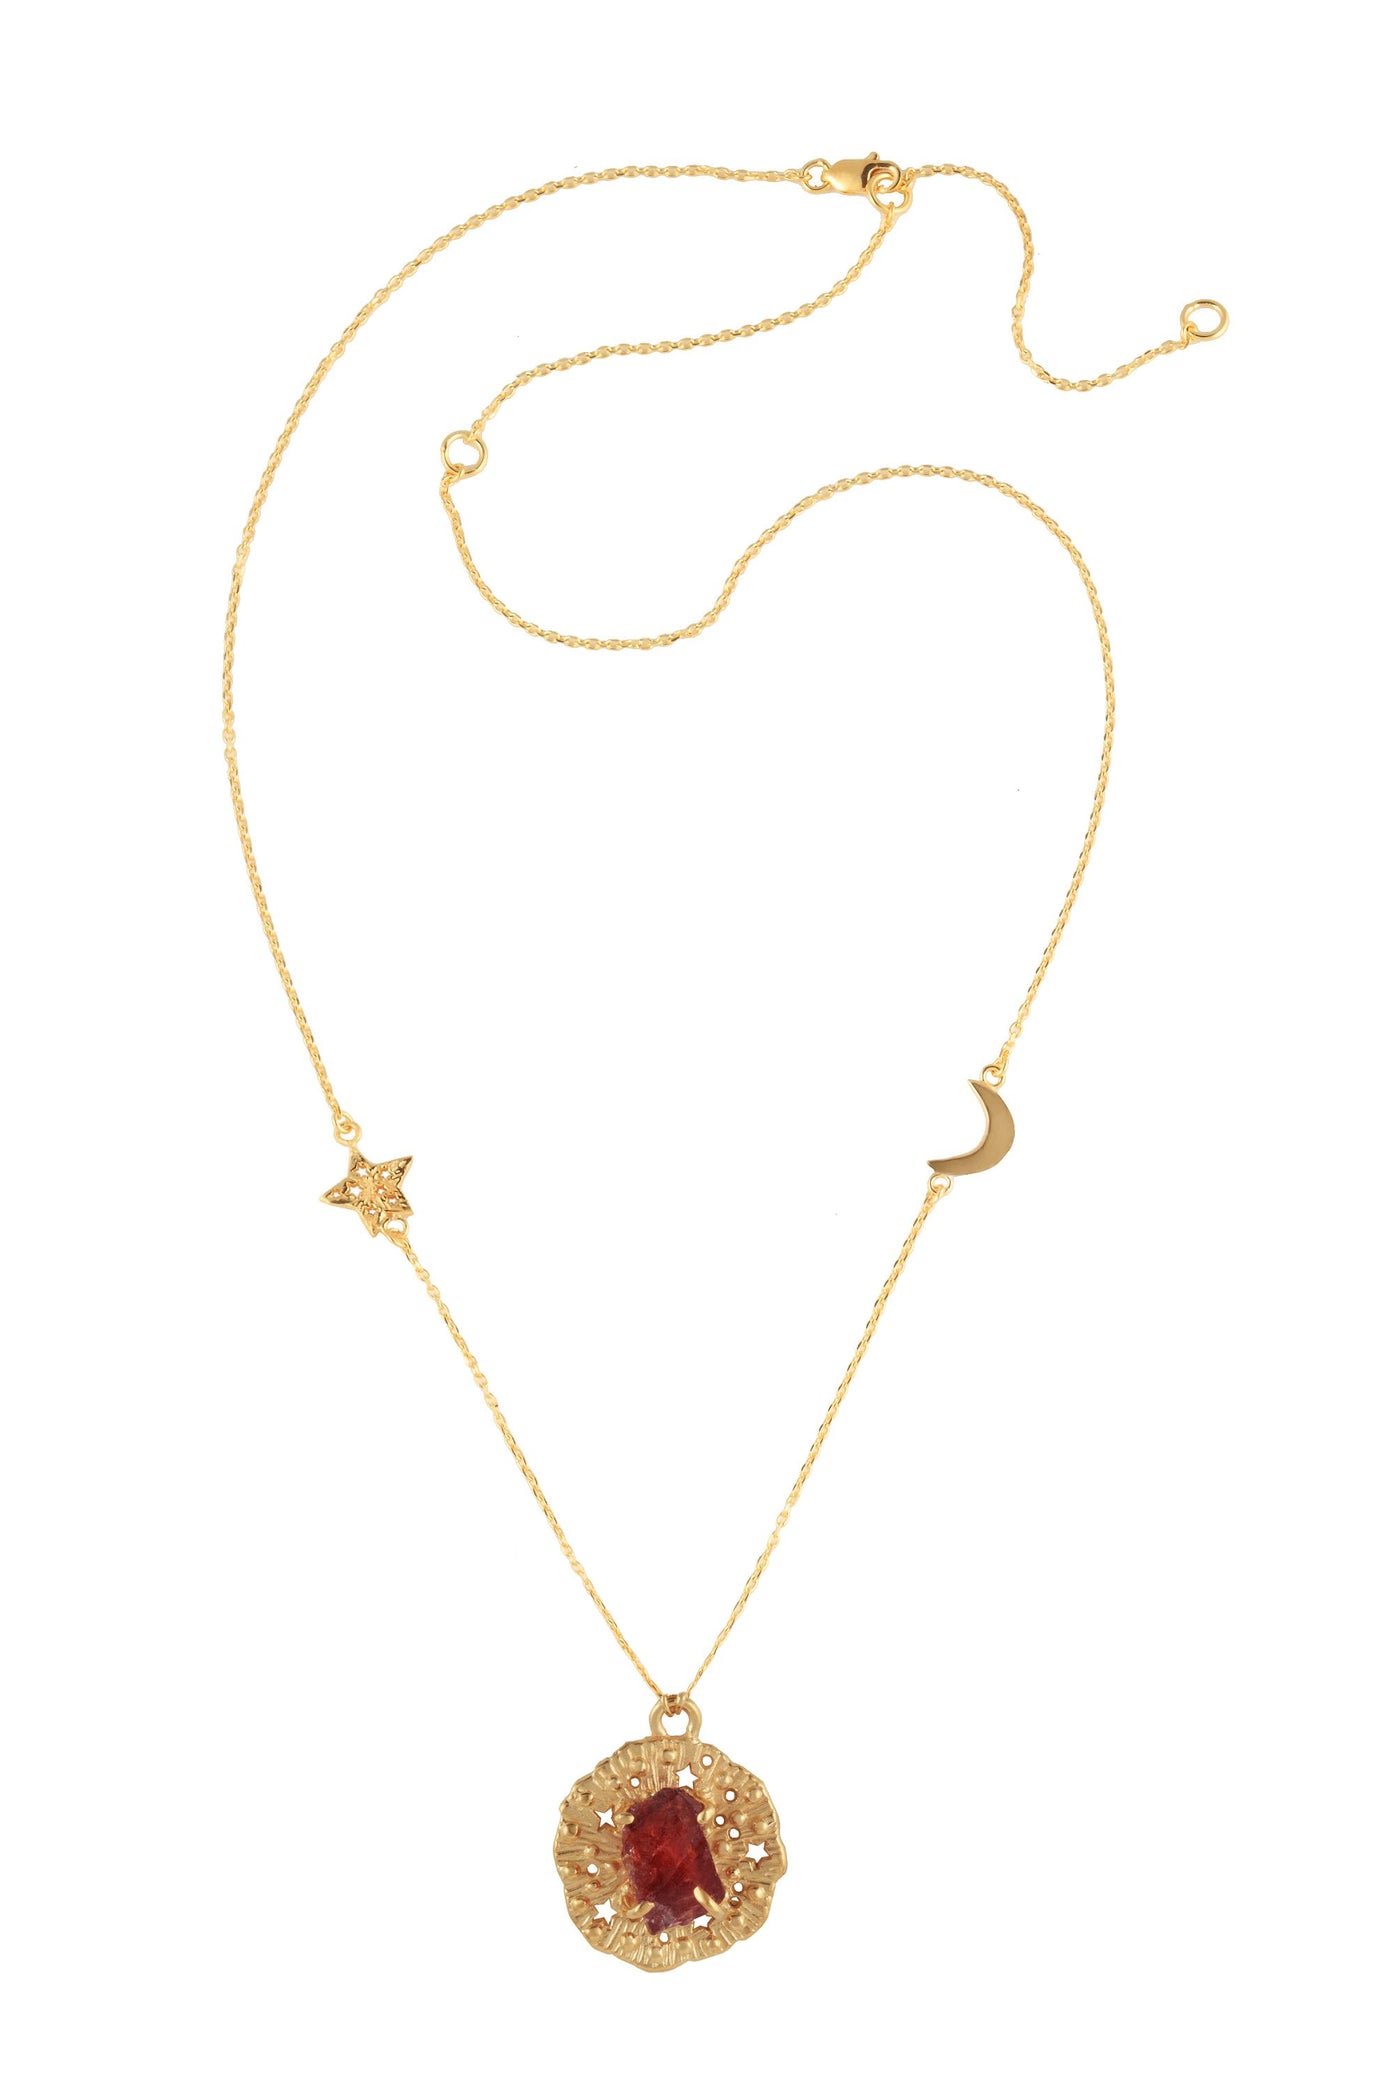 Solid Gold Chain Necklace with Small Runic Pendant and Rough Stone, Star and Moon, 46 cm